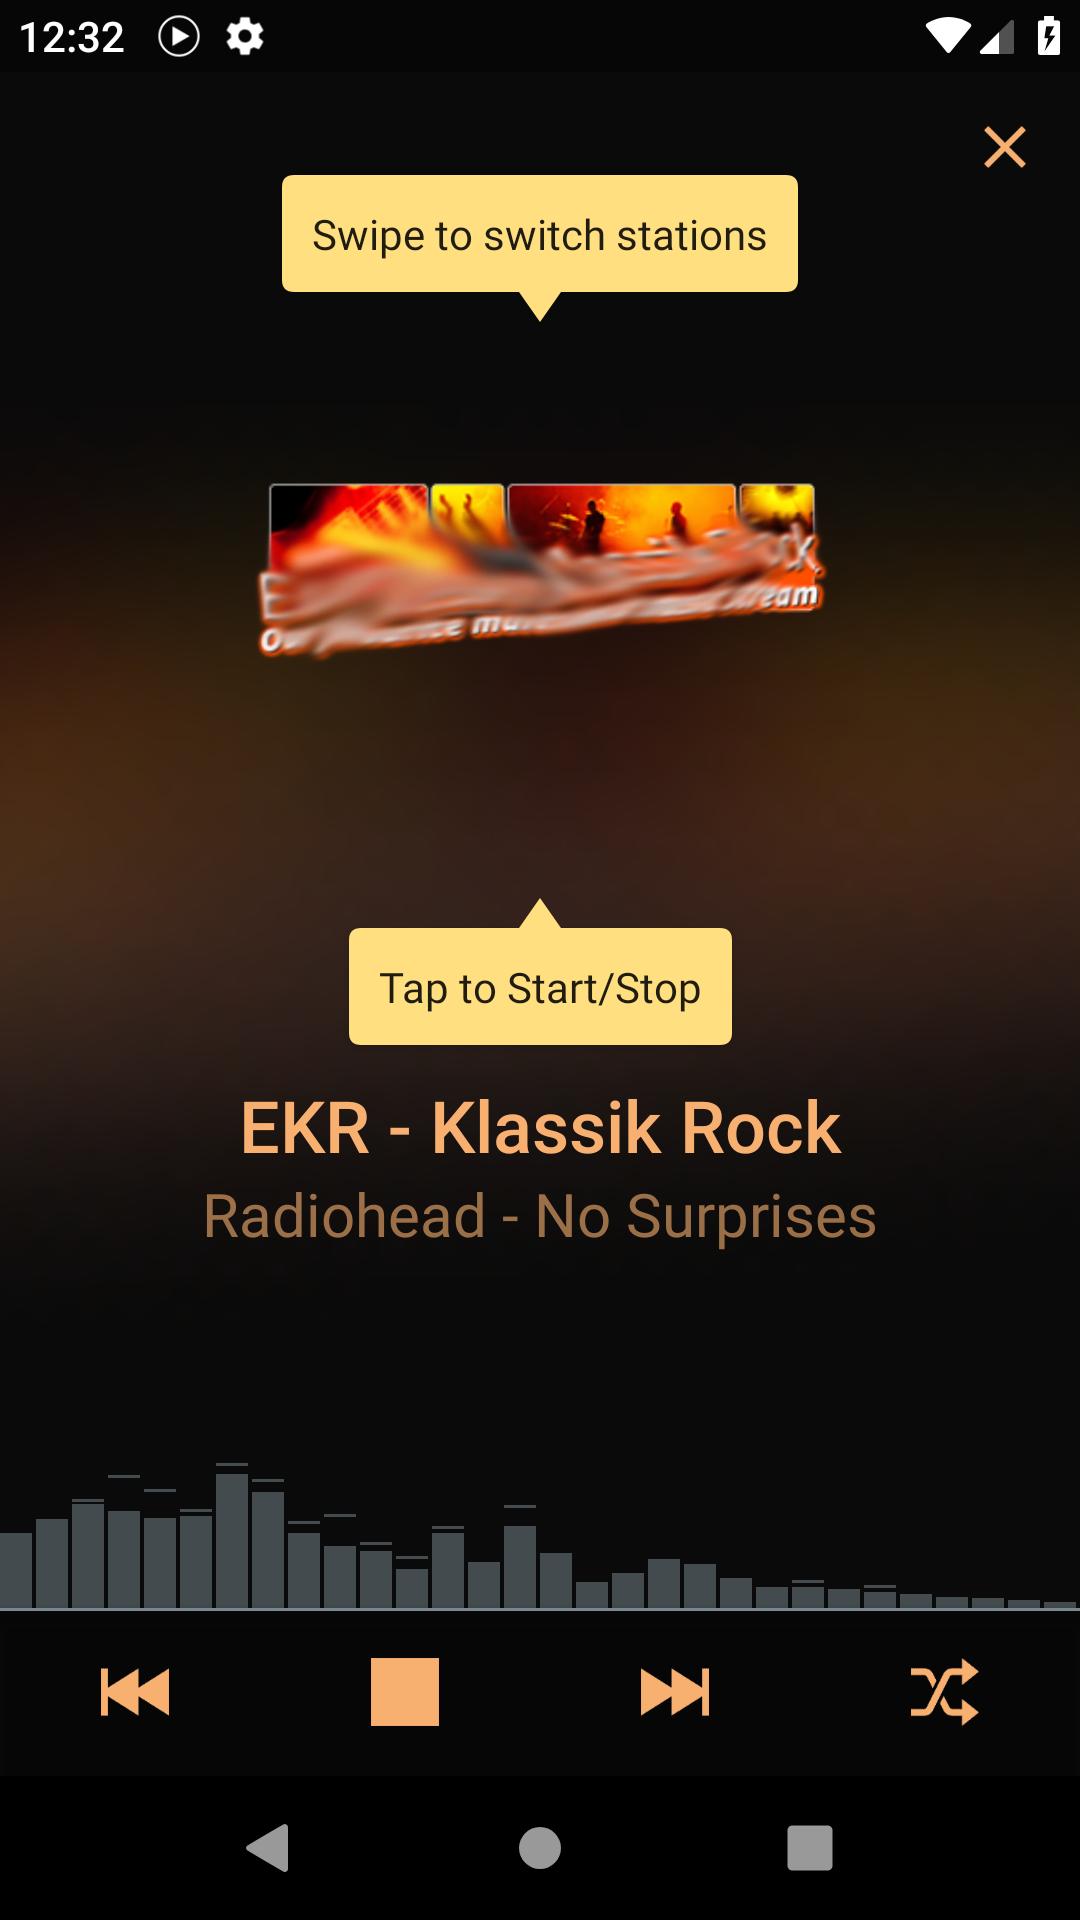 Rock Music online radio for Android - APK Download